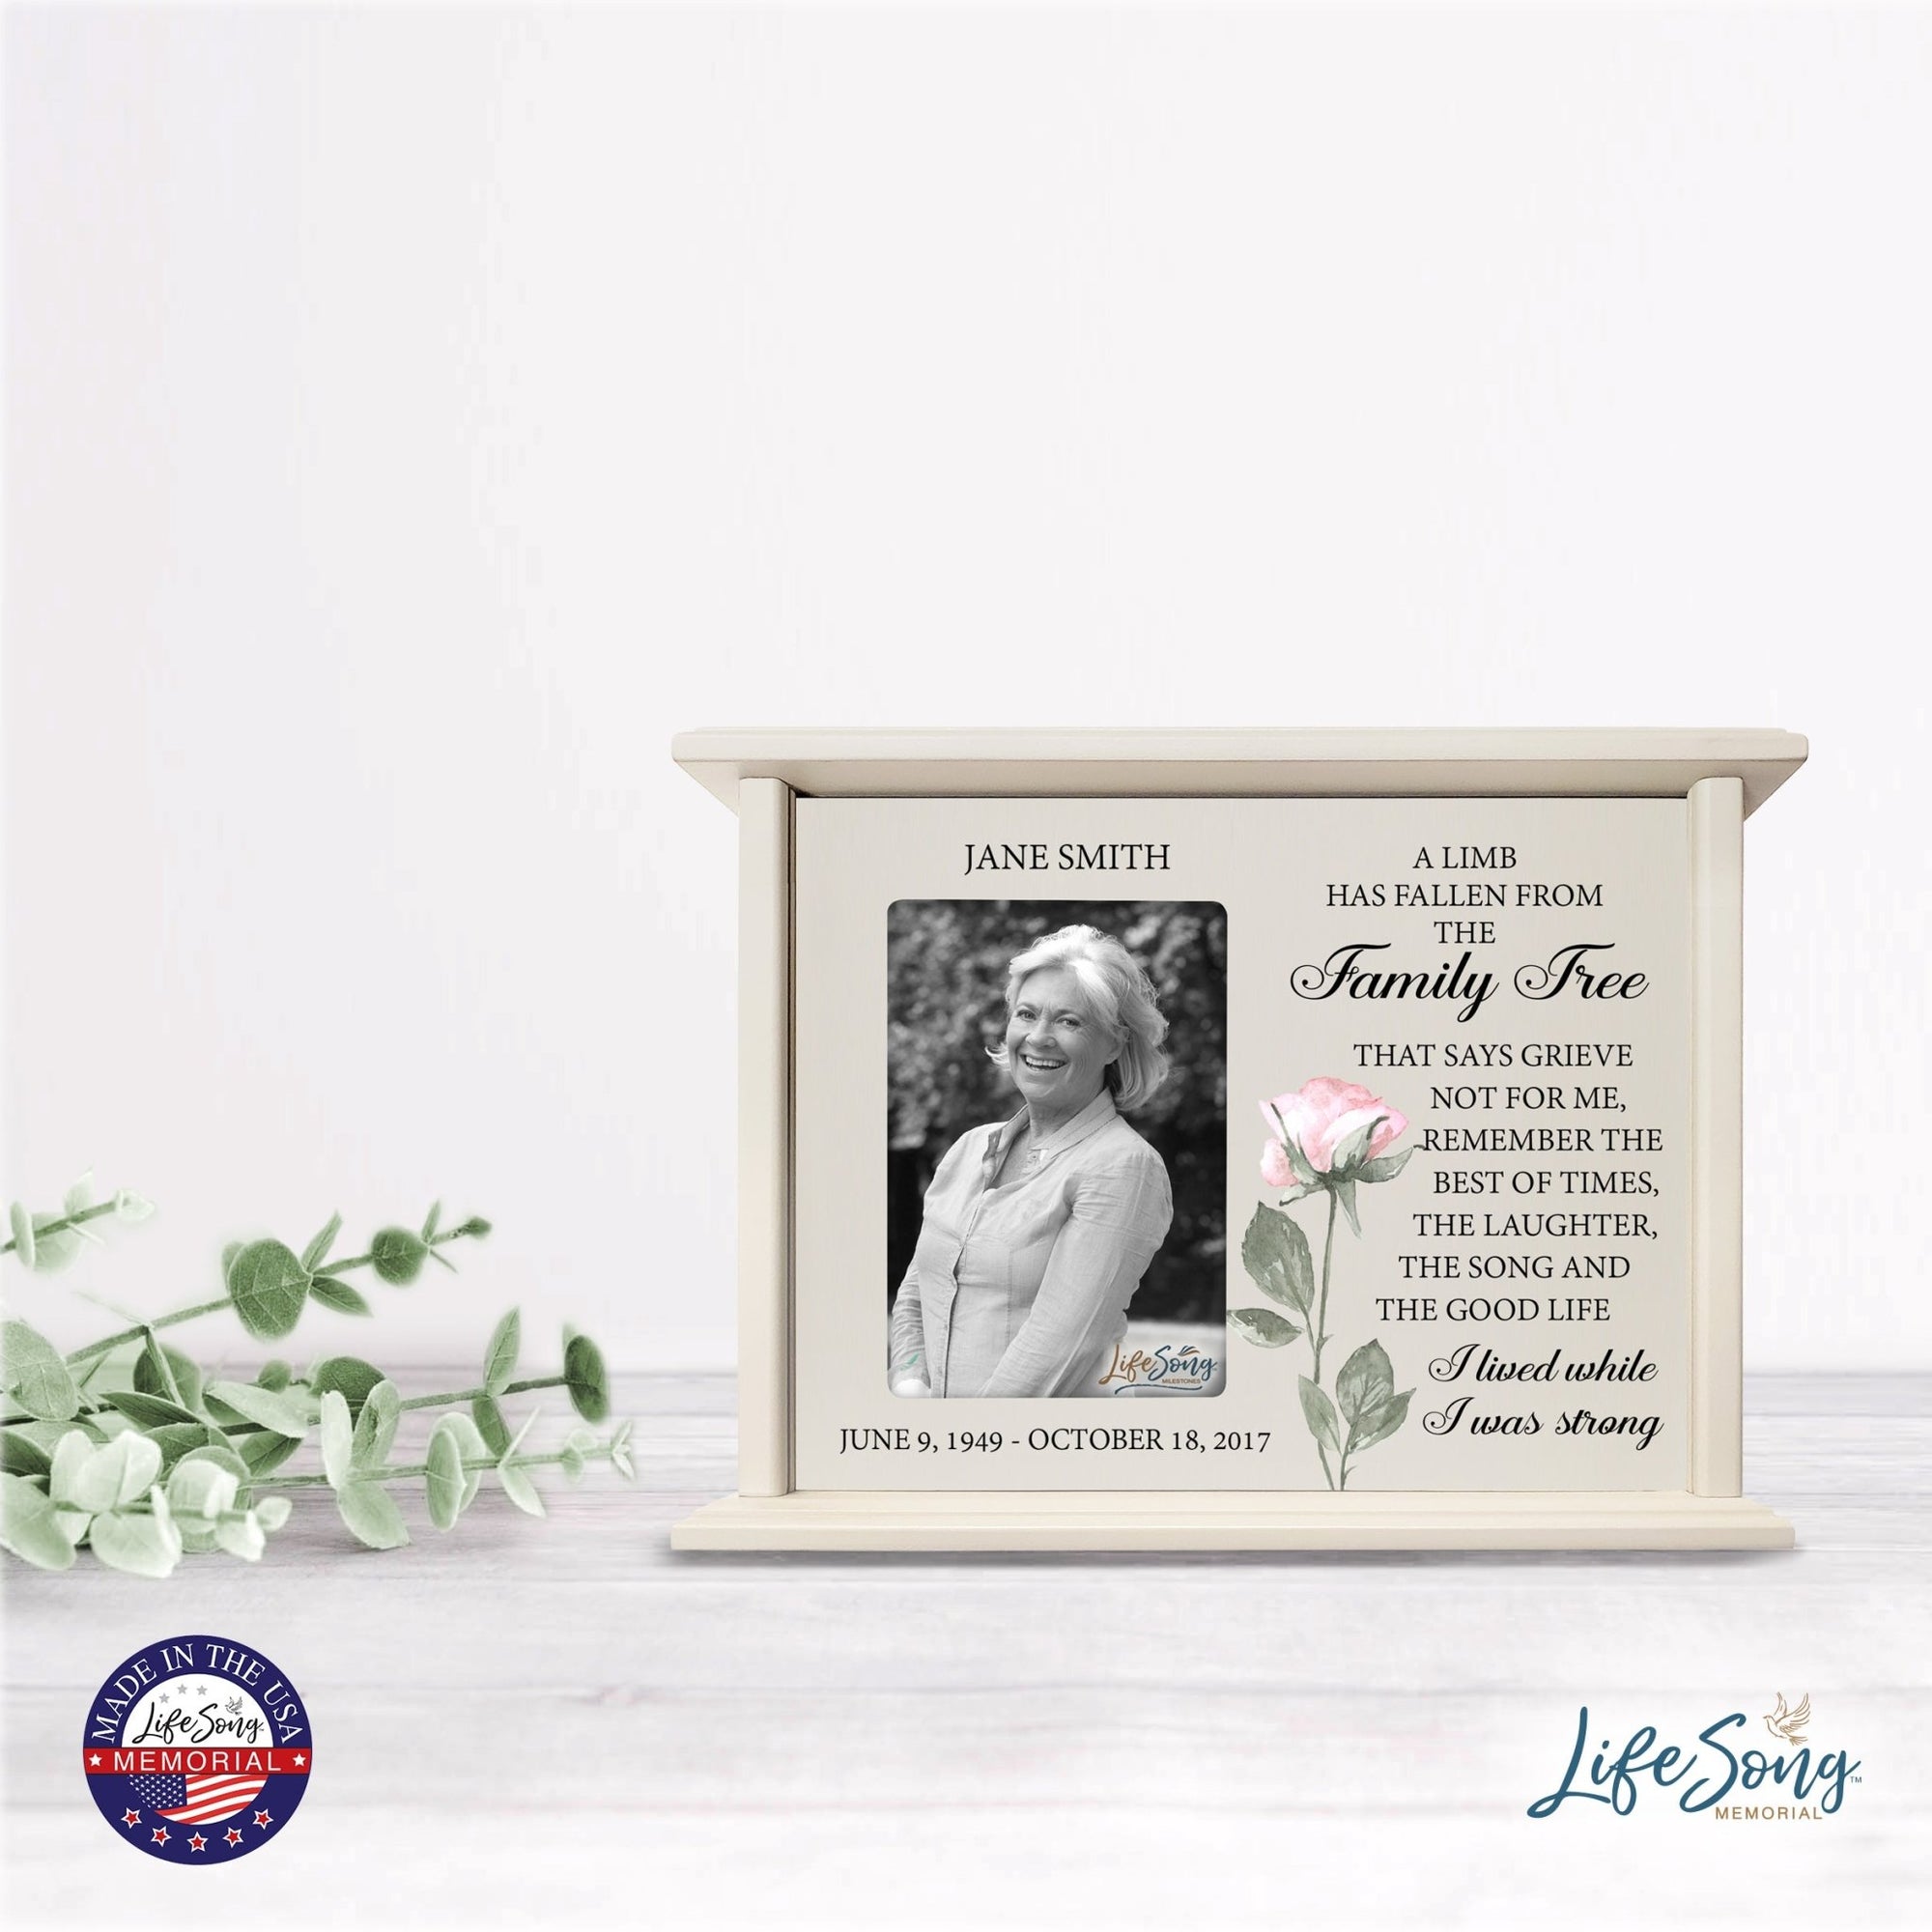 Personalized Memorial Cherry Wood 12 x 4.5 x 9 Cremation Urn Box with Picture Frame holds 200 cu in of Human Ashes and 4x6 Photo - A Limb Has Fallen (Ivory) - LifeSong Milestones